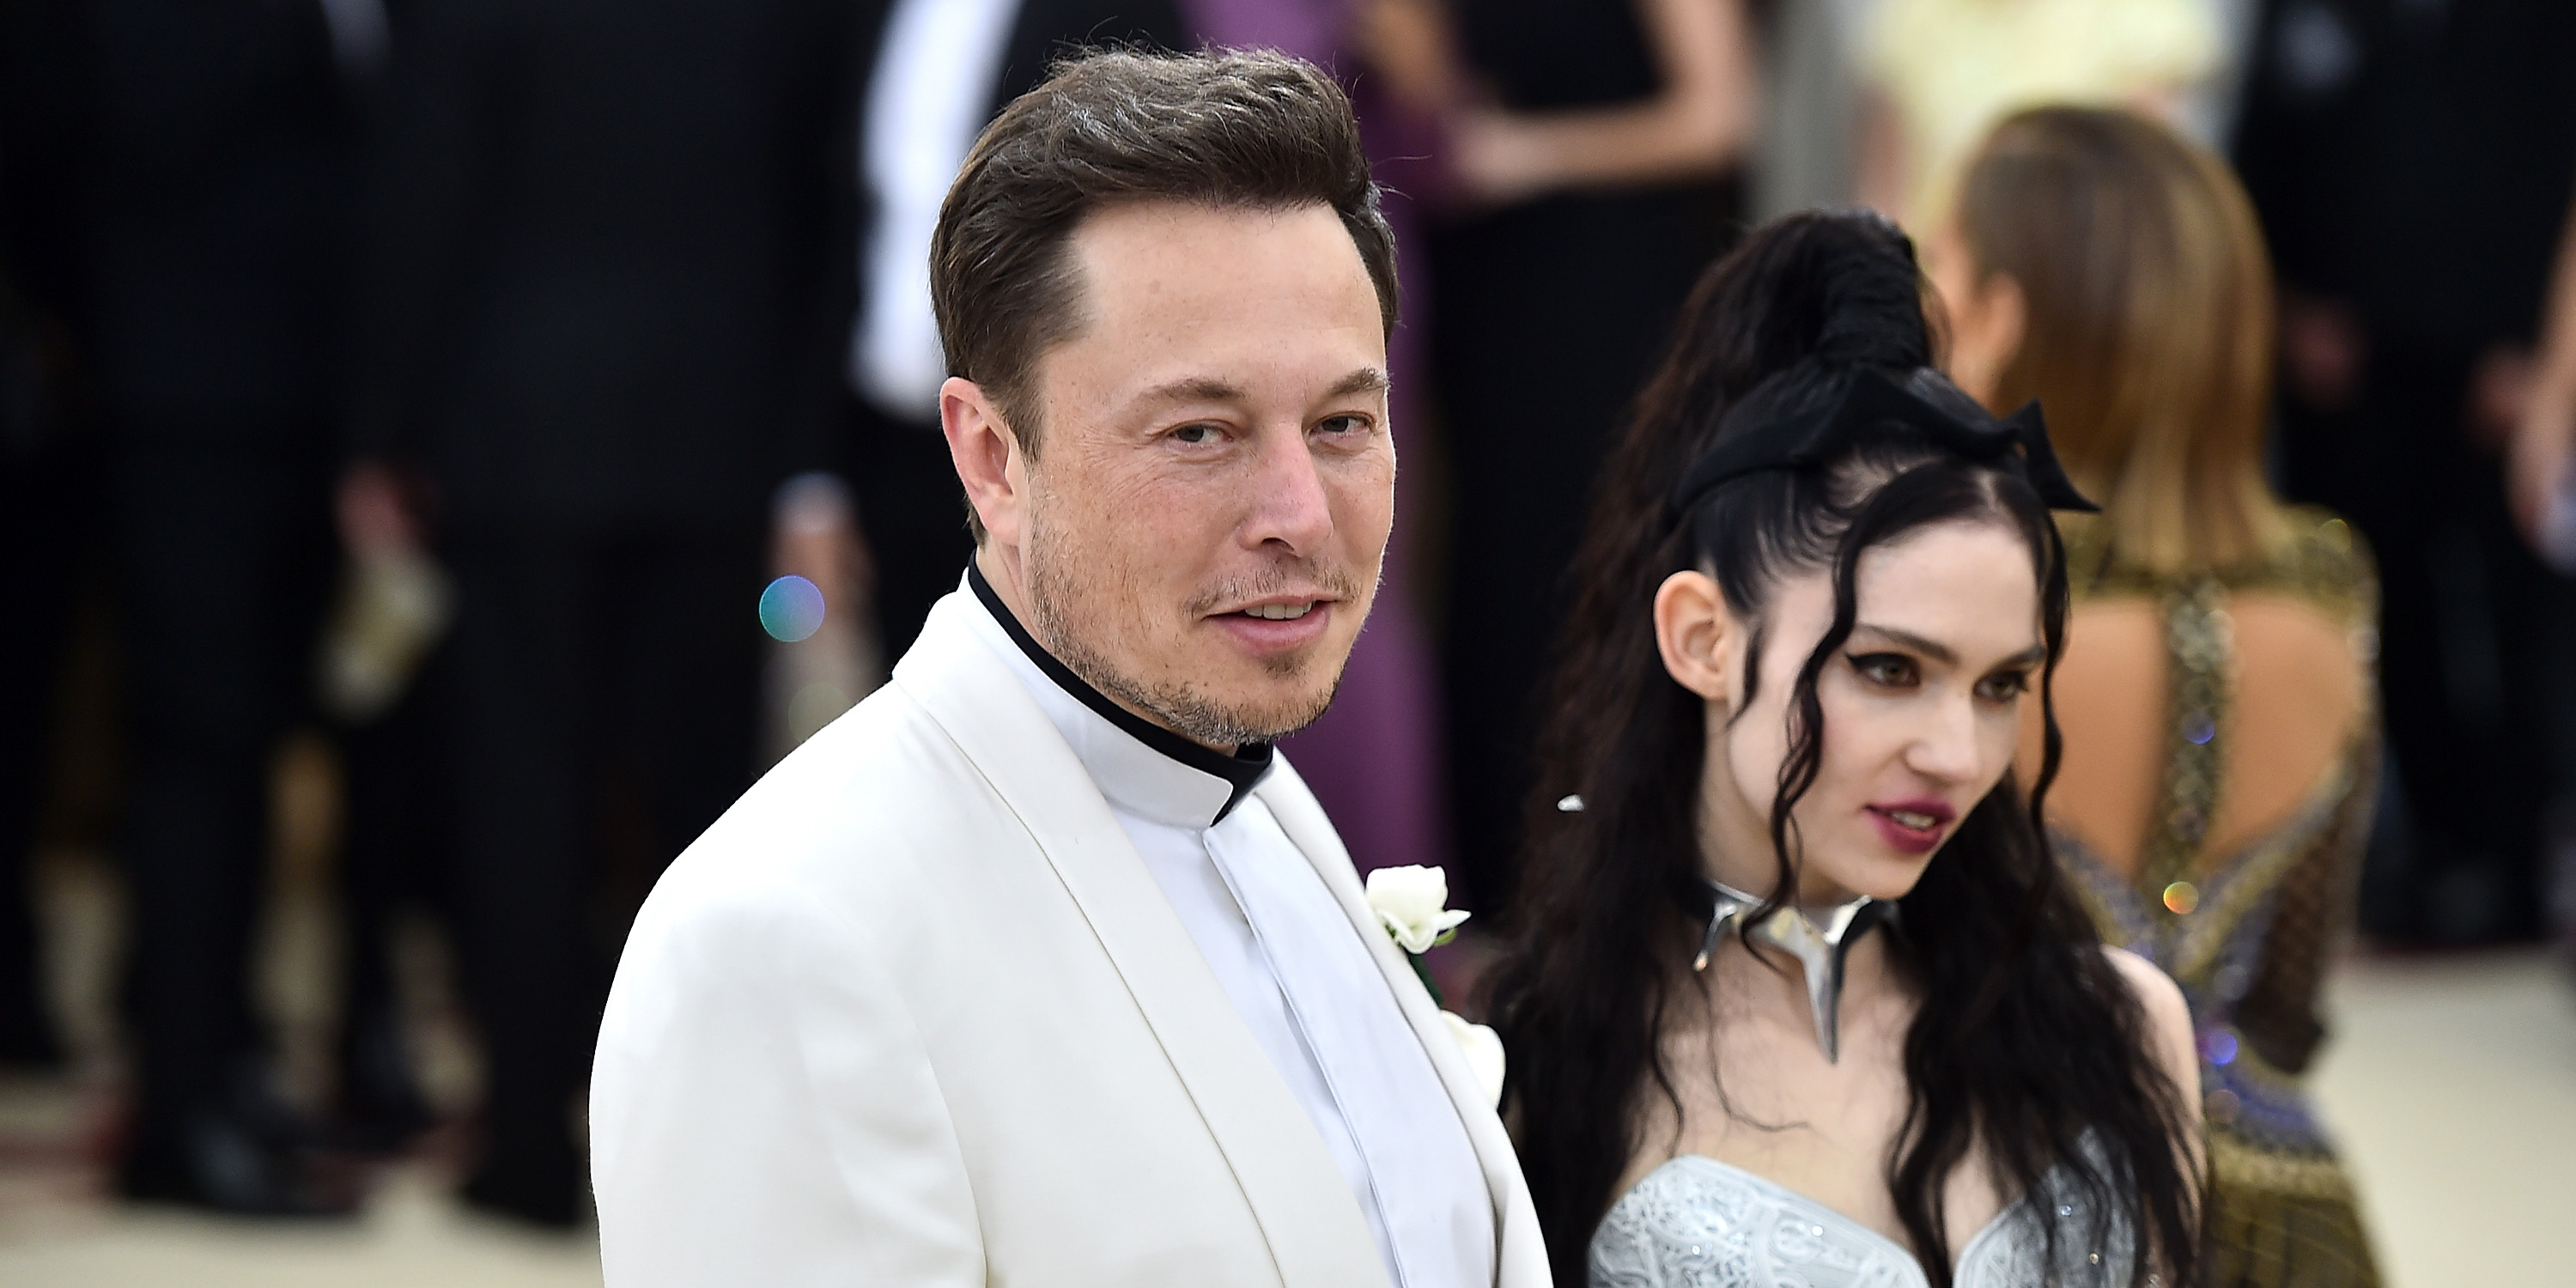 Elon Musk and Grimes gave their baby an unusual name with multiple hidden meanings, and it may have a hidden connection to the X-Men (TSLA)